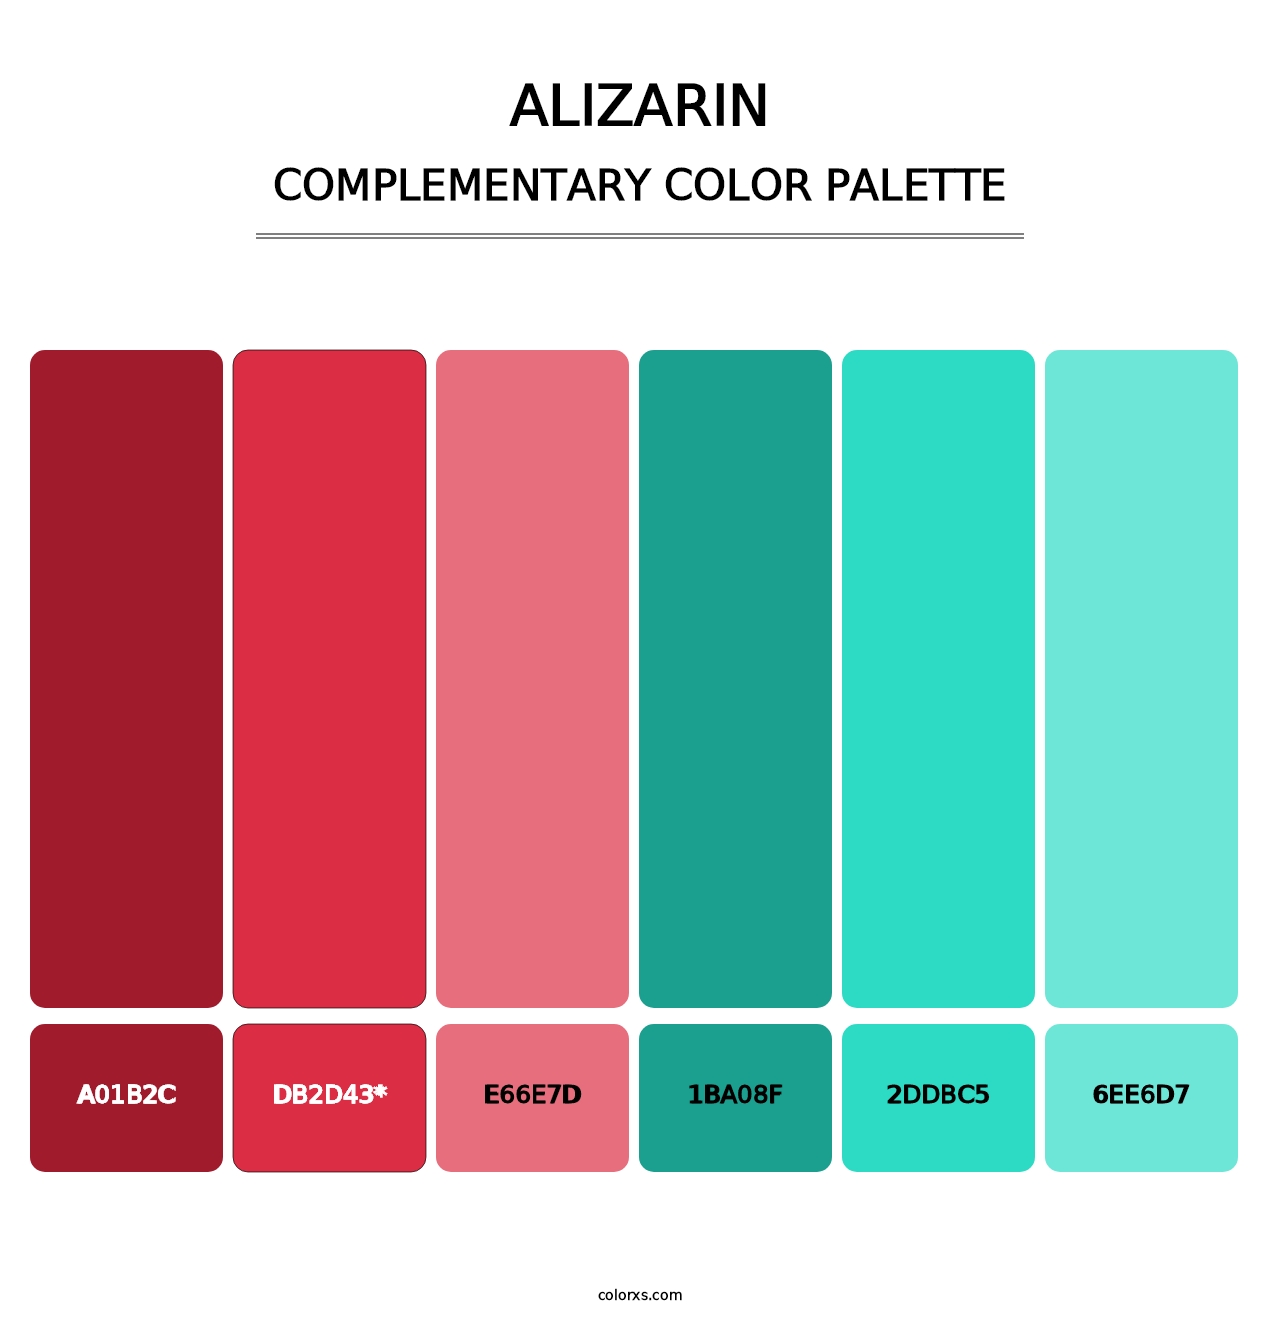 Alizarin - Complementary Color Palette